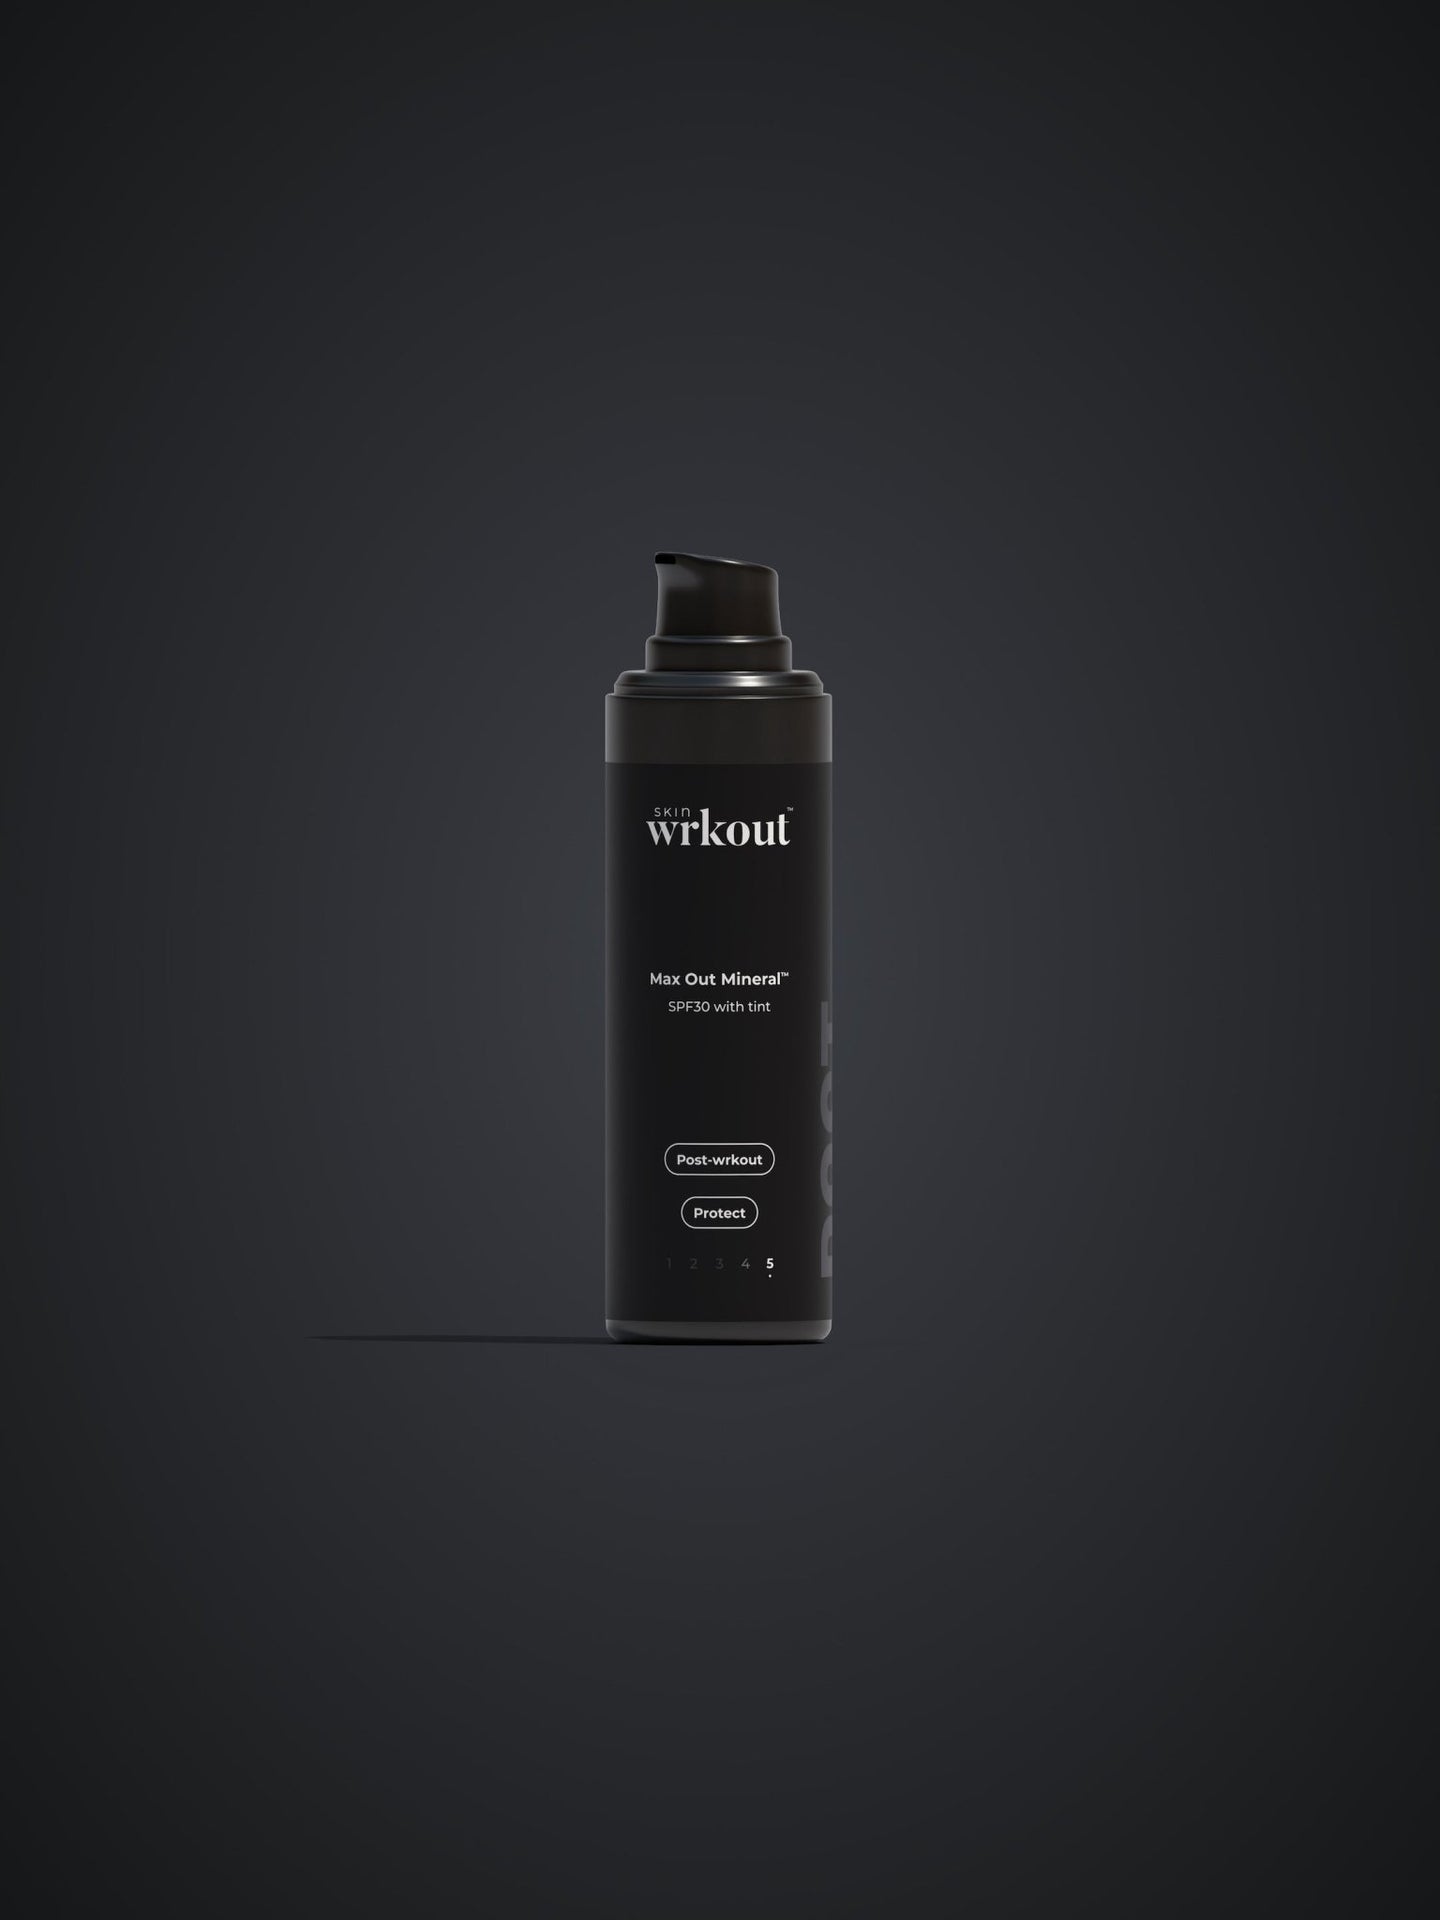 Max Out Mineral™ SPF30 with Tint (Post-wrkout™) - Skin Wrkout™